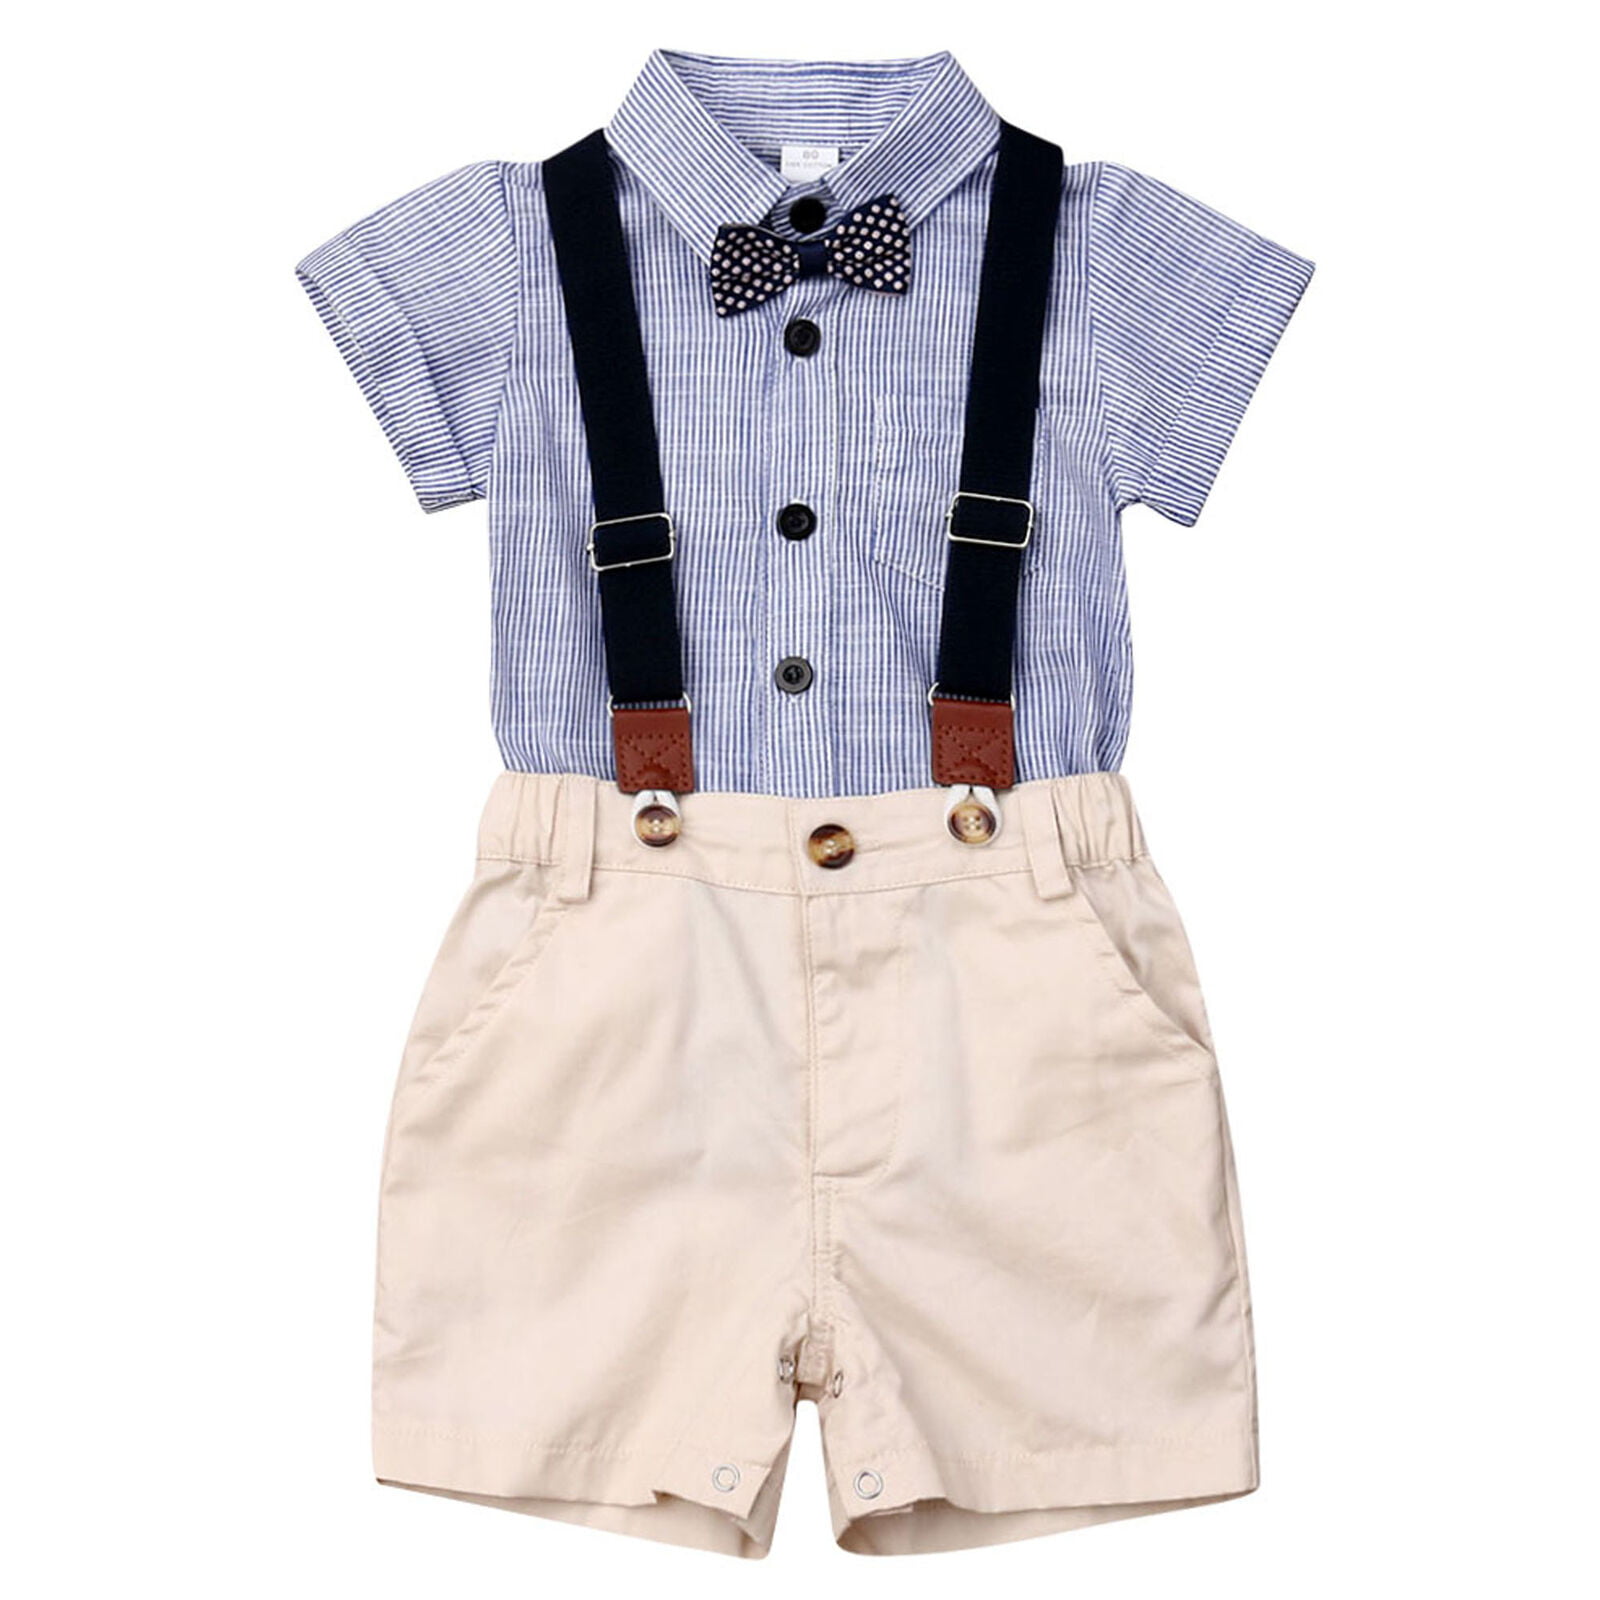 Wanshop  Boys Outfits Set Suspenders Strap Shorts Kids Formal Party Outfit Gentleman Clothing Sets Gentlemen Suit for Baby Boy Bowtie Shirt Top